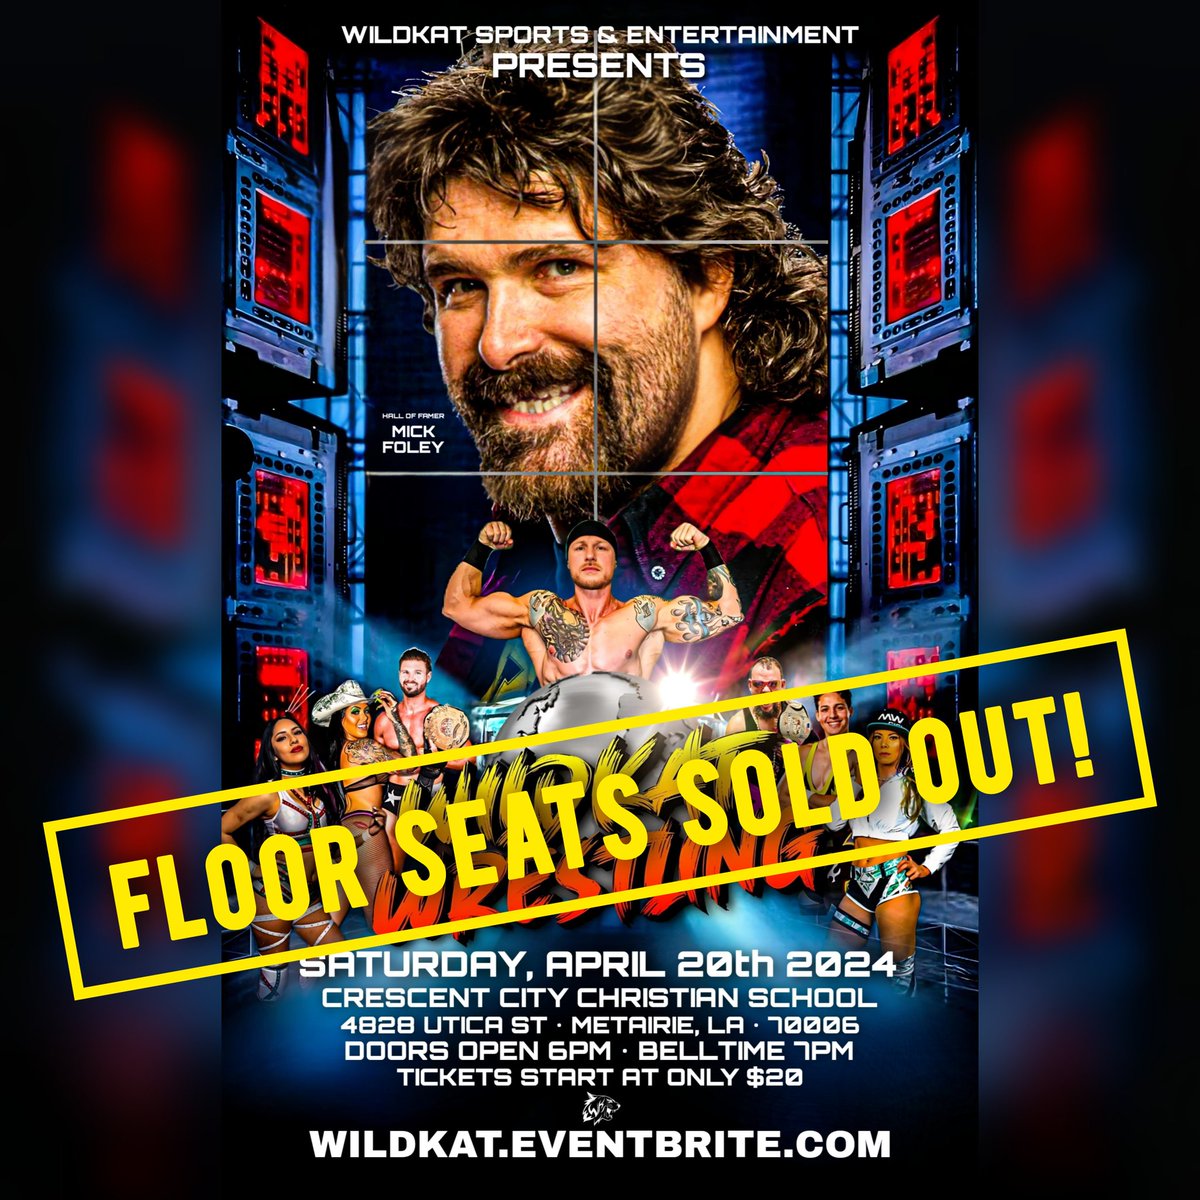 😱FLOOR IS ALREADY SOLD OUT‼️ Get your @WildKatSports tickets for April 20th NOW, before the rest are gone too! WILDKAT.EVENTBRITE.COM And make sure you get your Meet & Greet Pass to see the Hardcore Legend Mick Foley! 💋